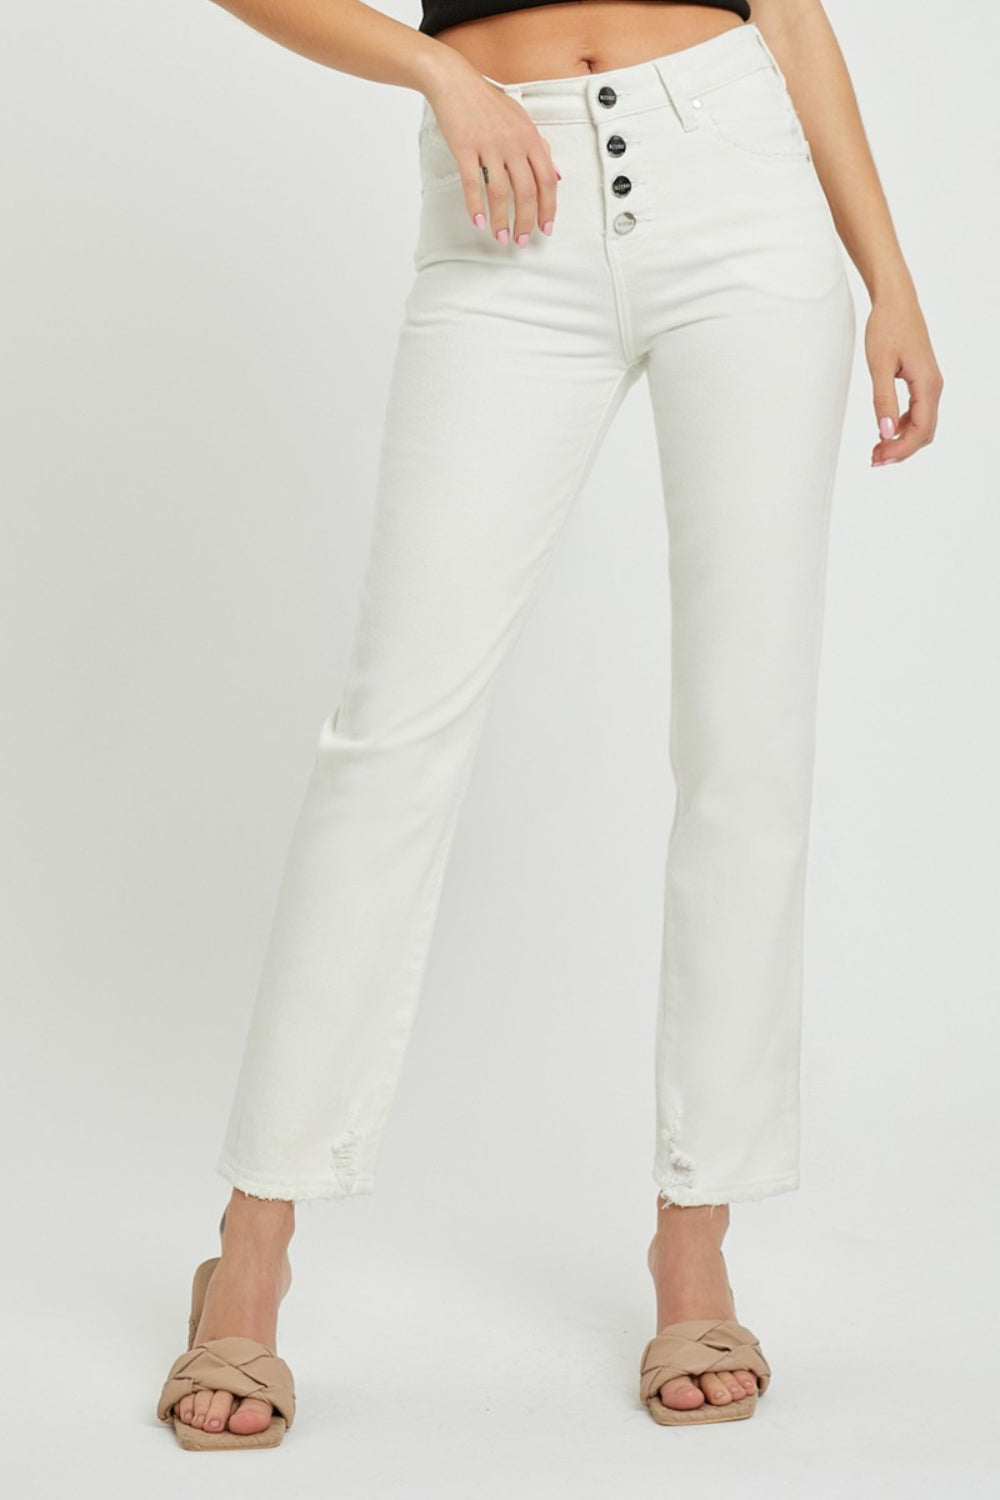 PRE-ORDER: RISEN Full Size Mid-Rise Tummy Control Straight Jeans